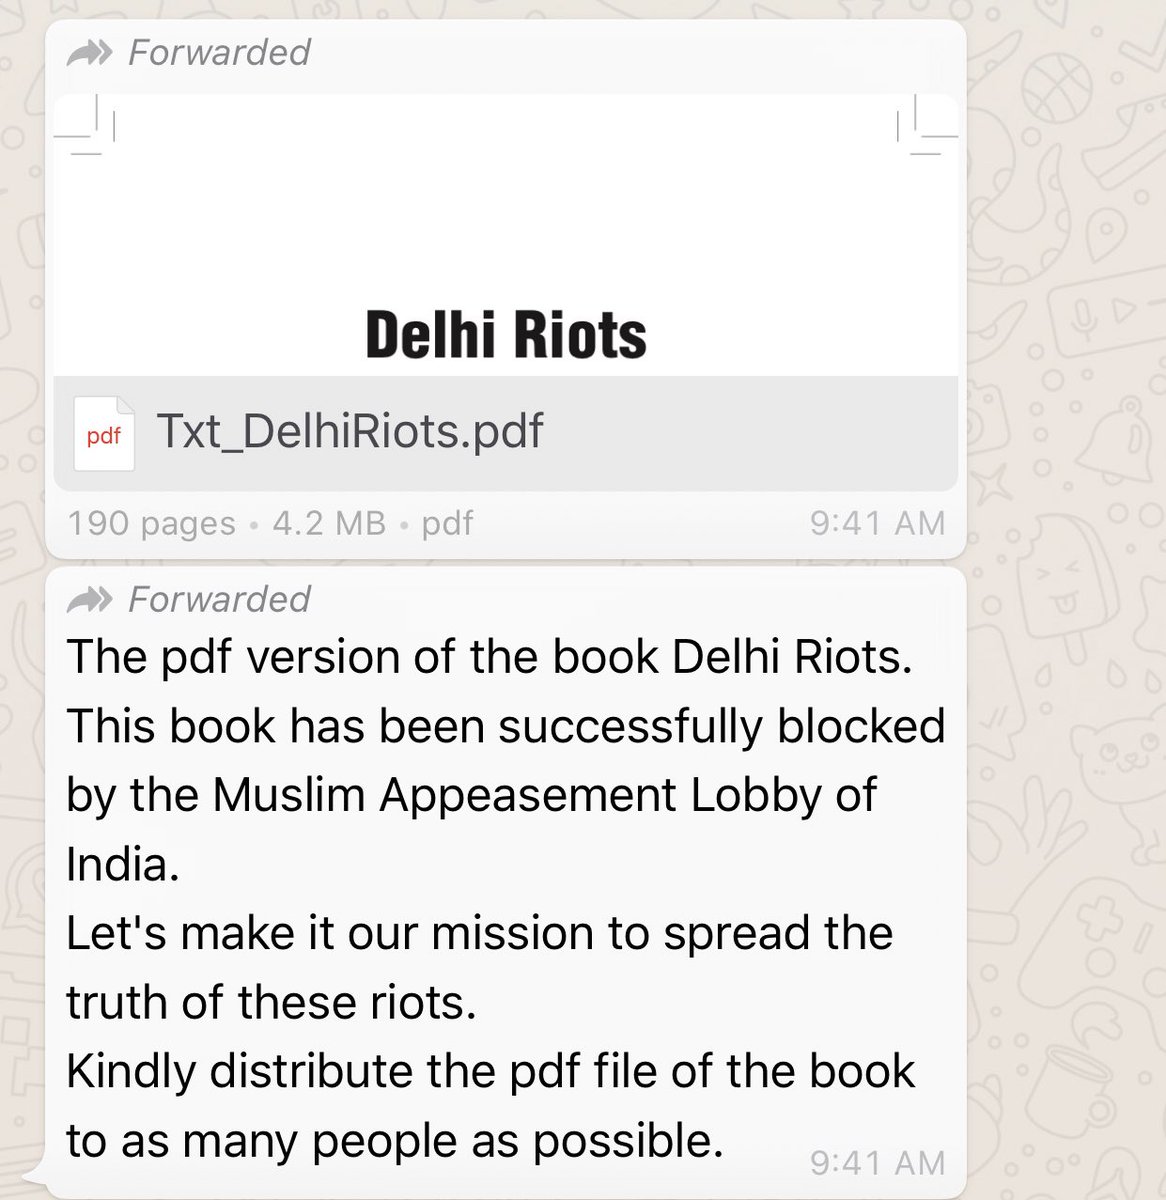 Today Morning I have received  #TruthOfDelhiRiots pdf copy thrice this morning and was surprised with maga circulation of this book all over, a Lucknow based independent digital agency when I reached out has projected it to be approx 1-2 Million. Though numbers are not confirmed!